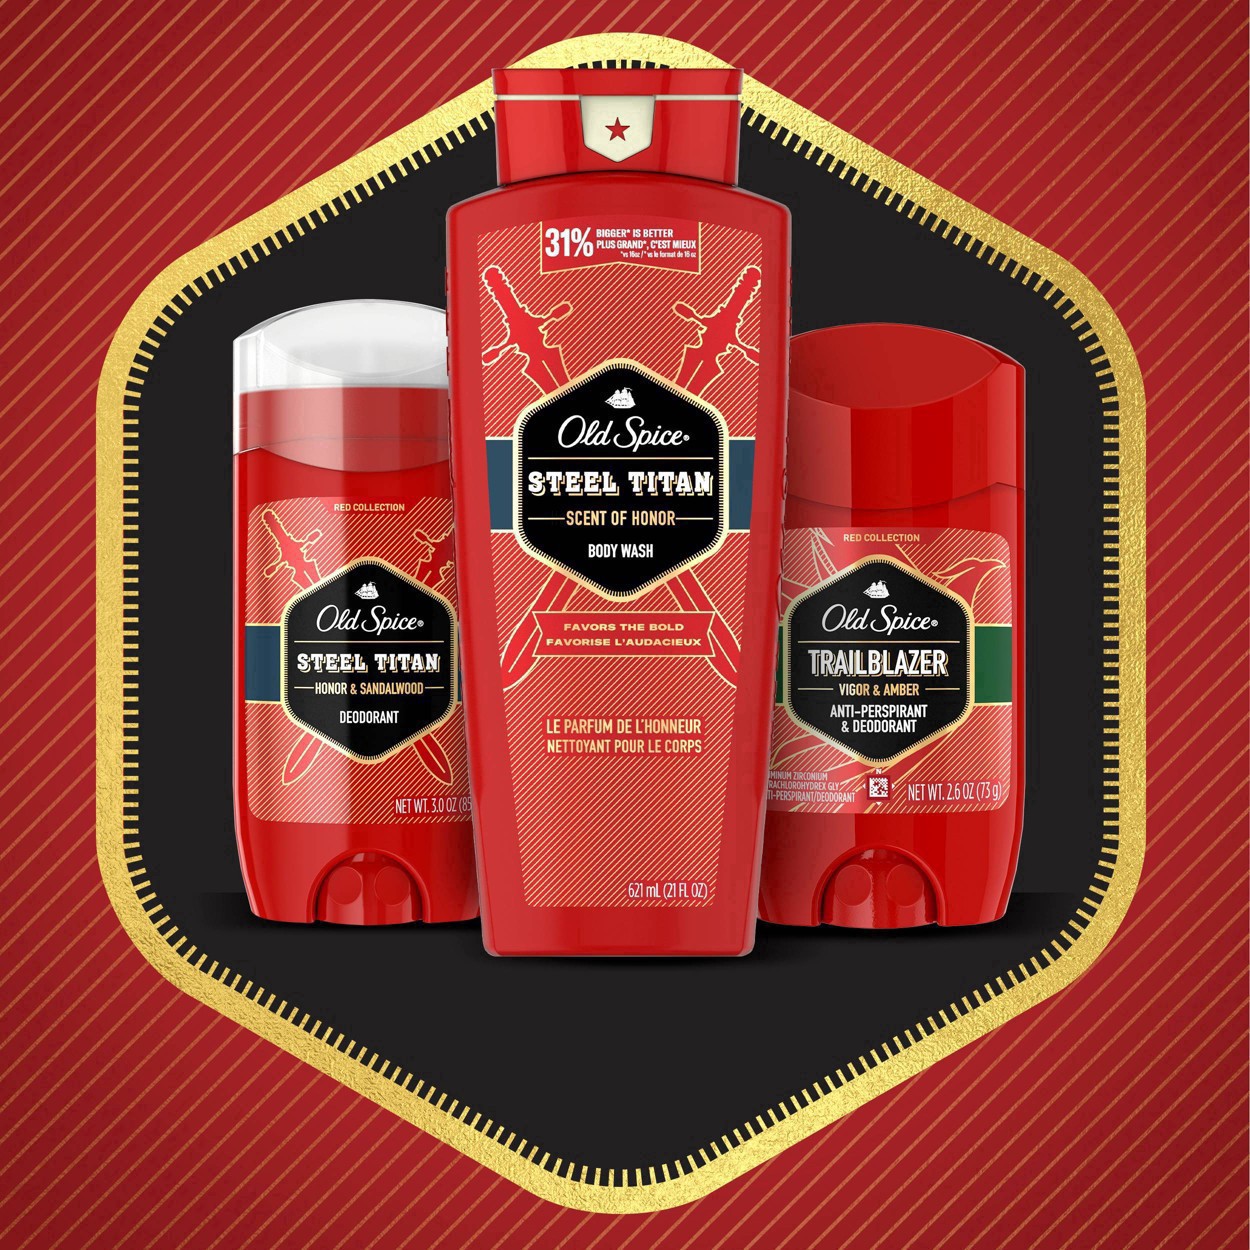 slide 75 of 95, Old Spice Red Collection Swagger Scent Deodorant for Men, Value Pack, 3.0 oz, Pack of 2, 2 ct; 3 oz